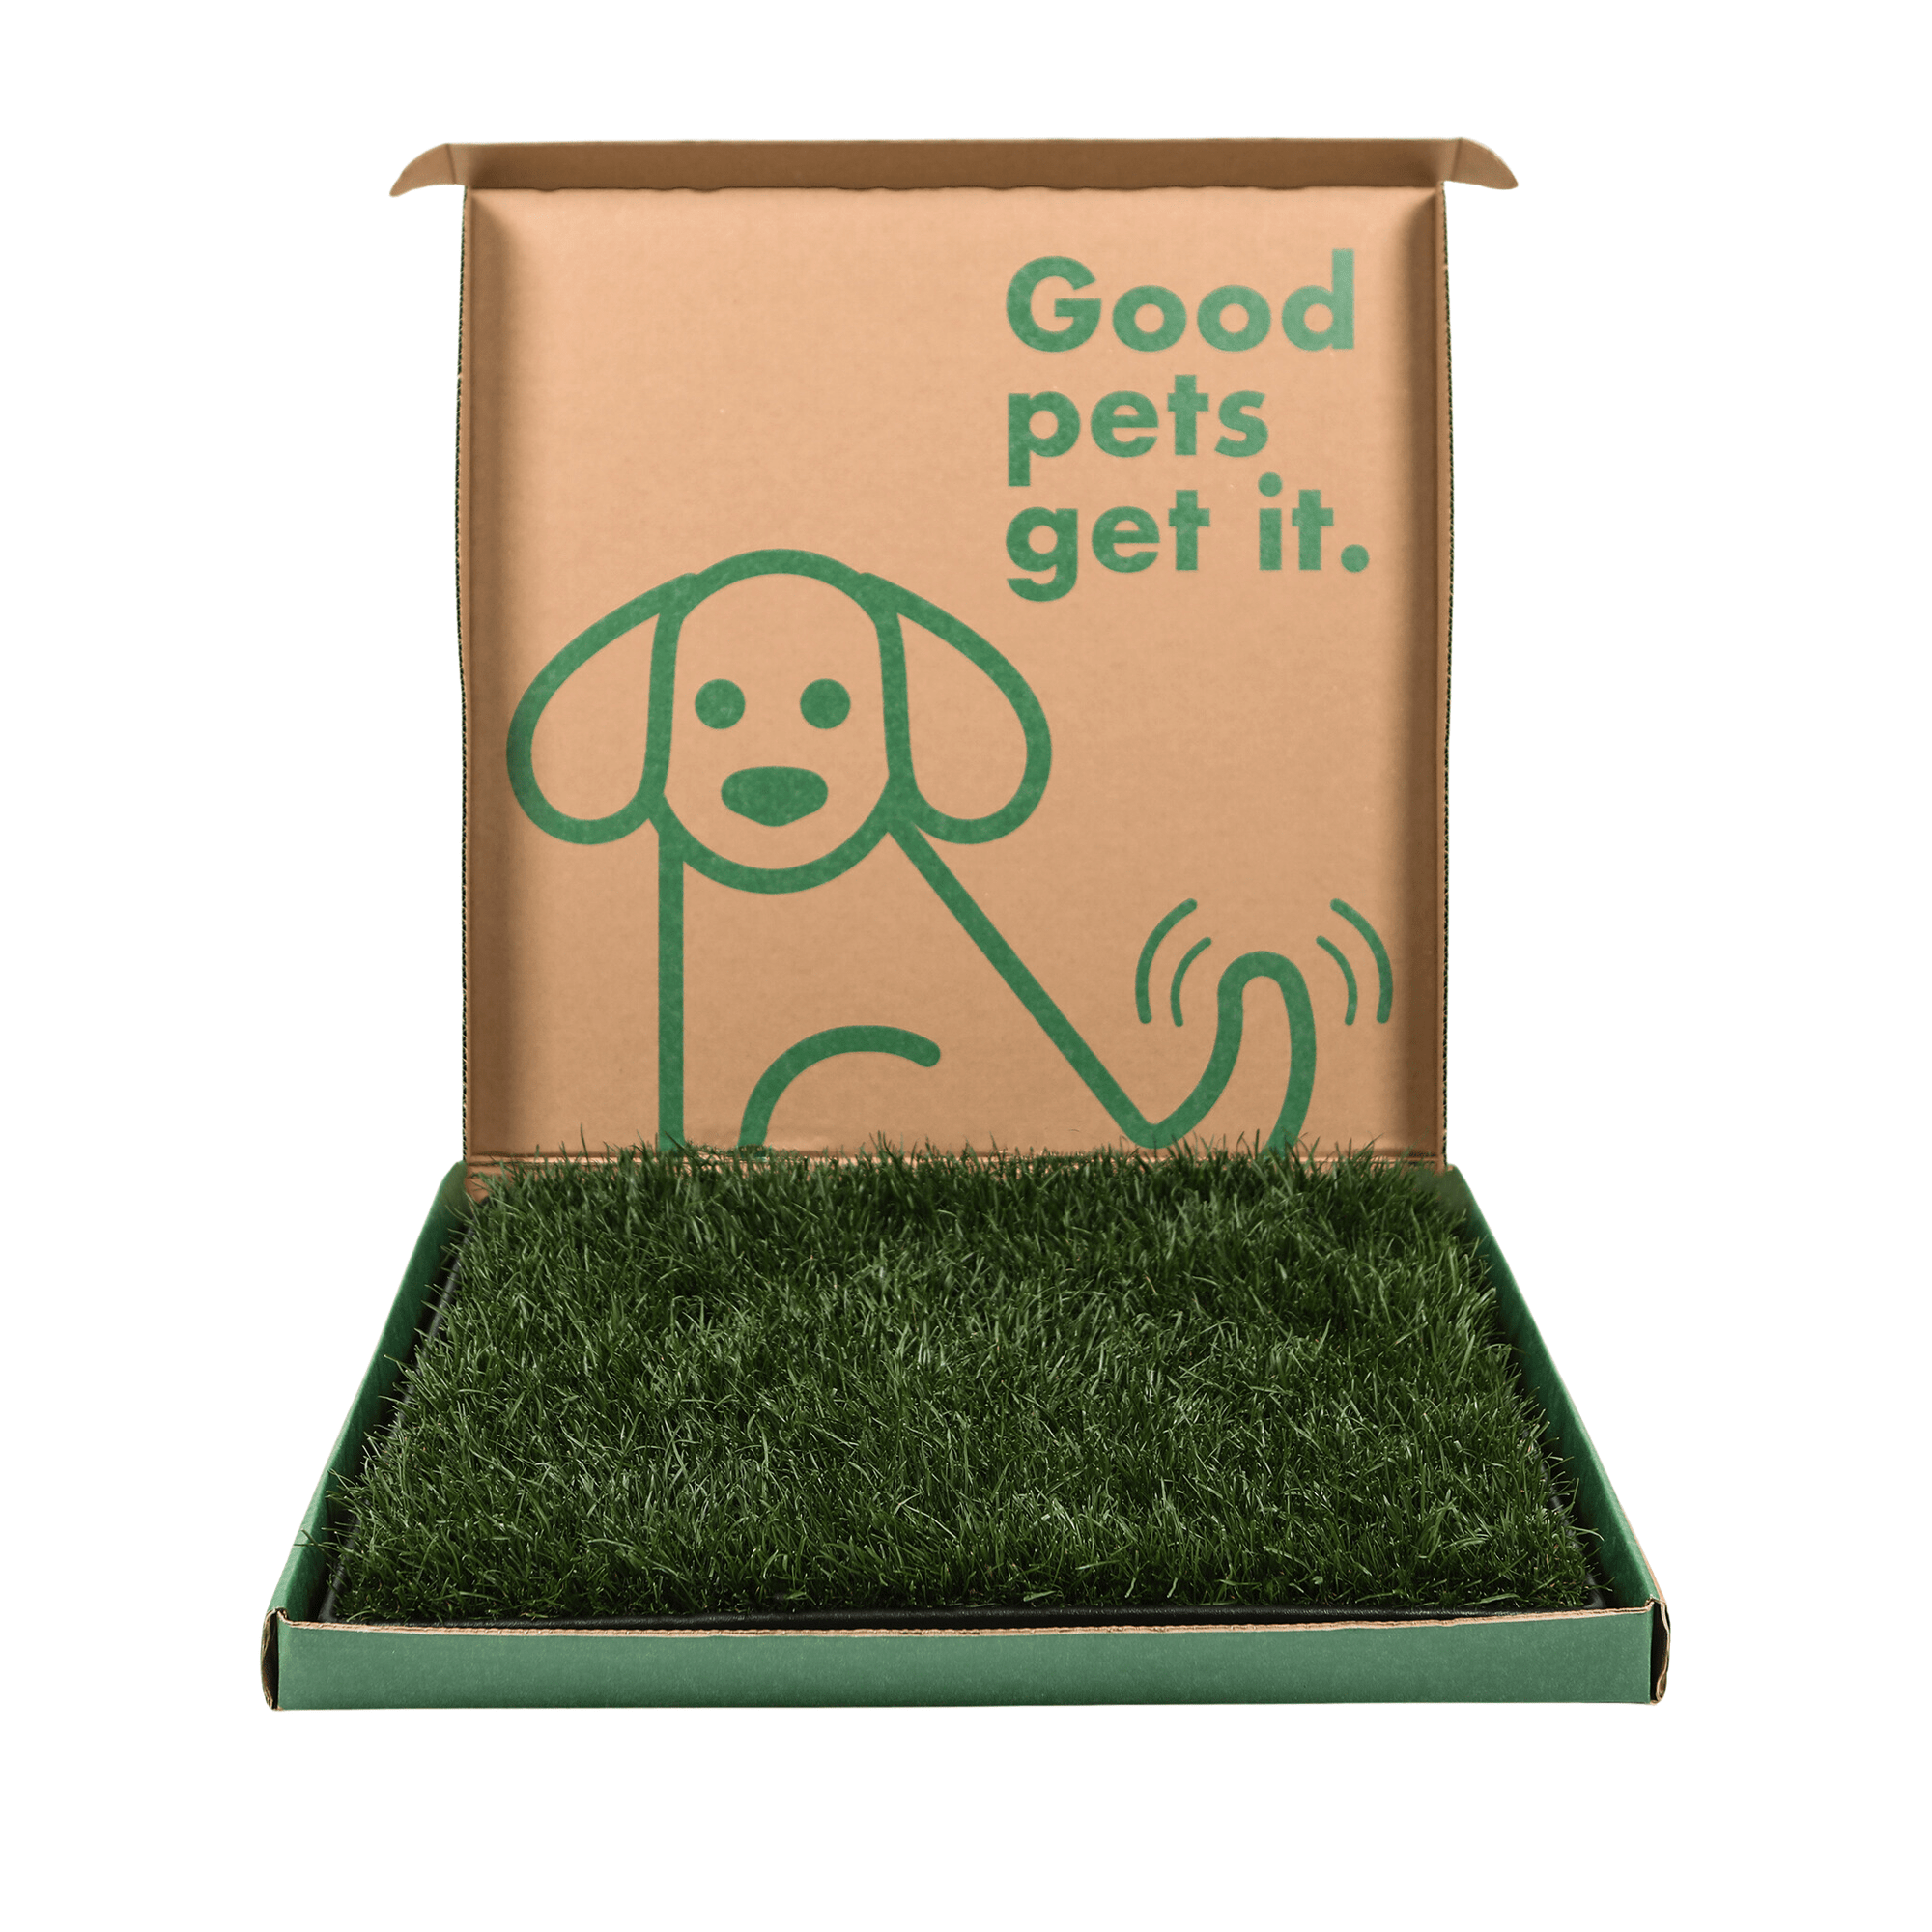 Vector of dog with slogan Good Pets Get it with Large Fresh Patch Grass and Tray